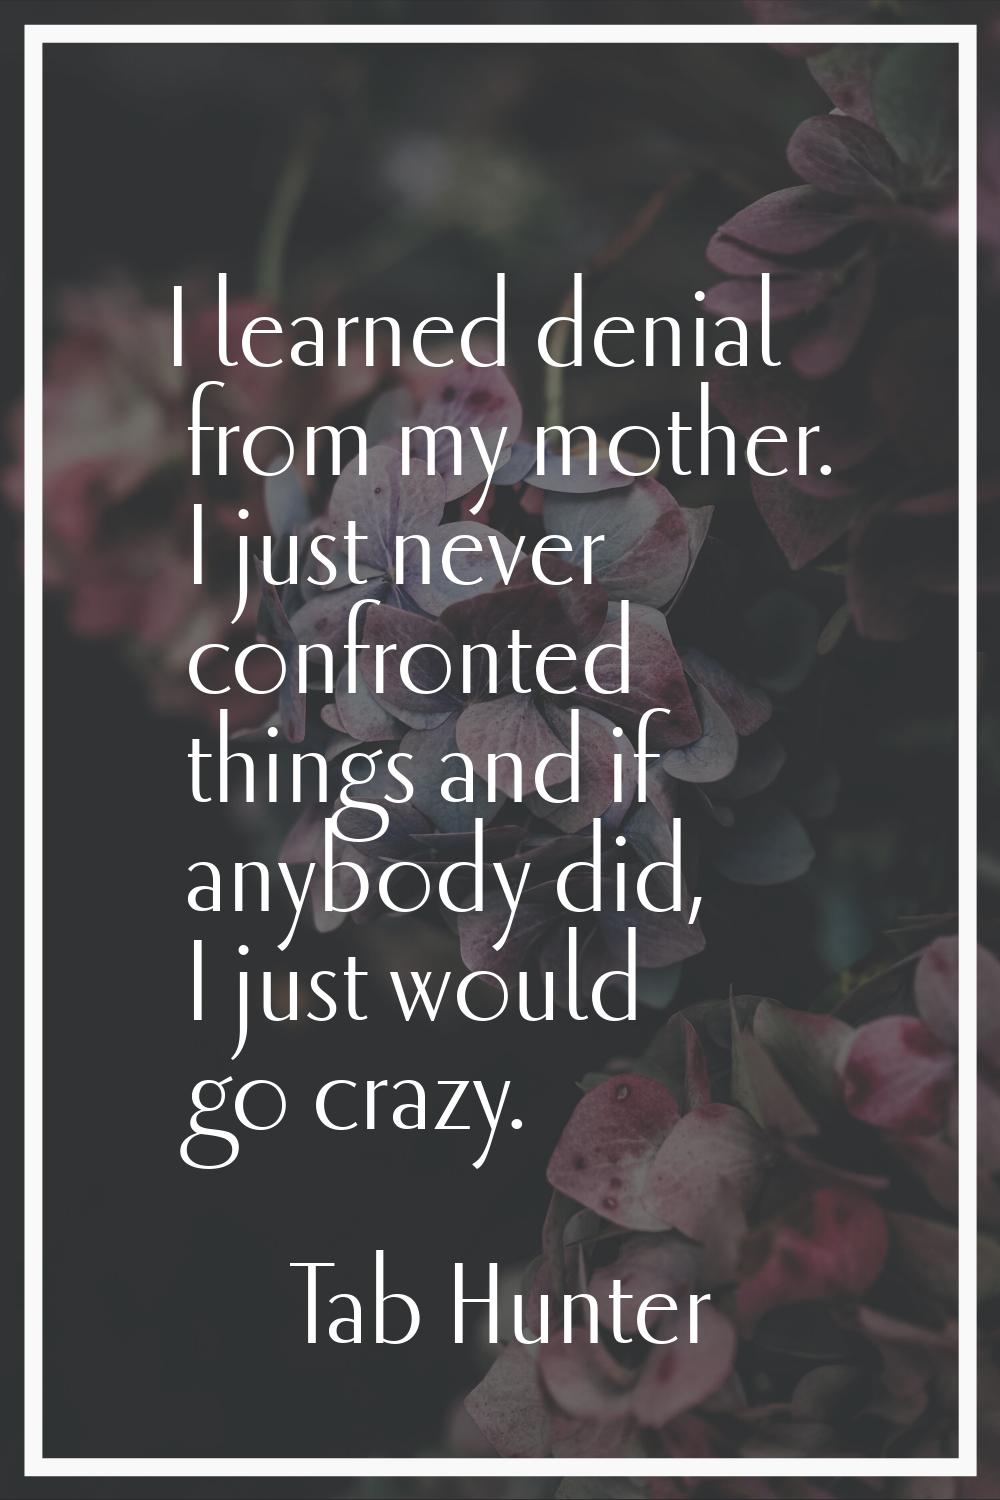 I learned denial from my mother. I just never confronted things and if anybody did, I just would go